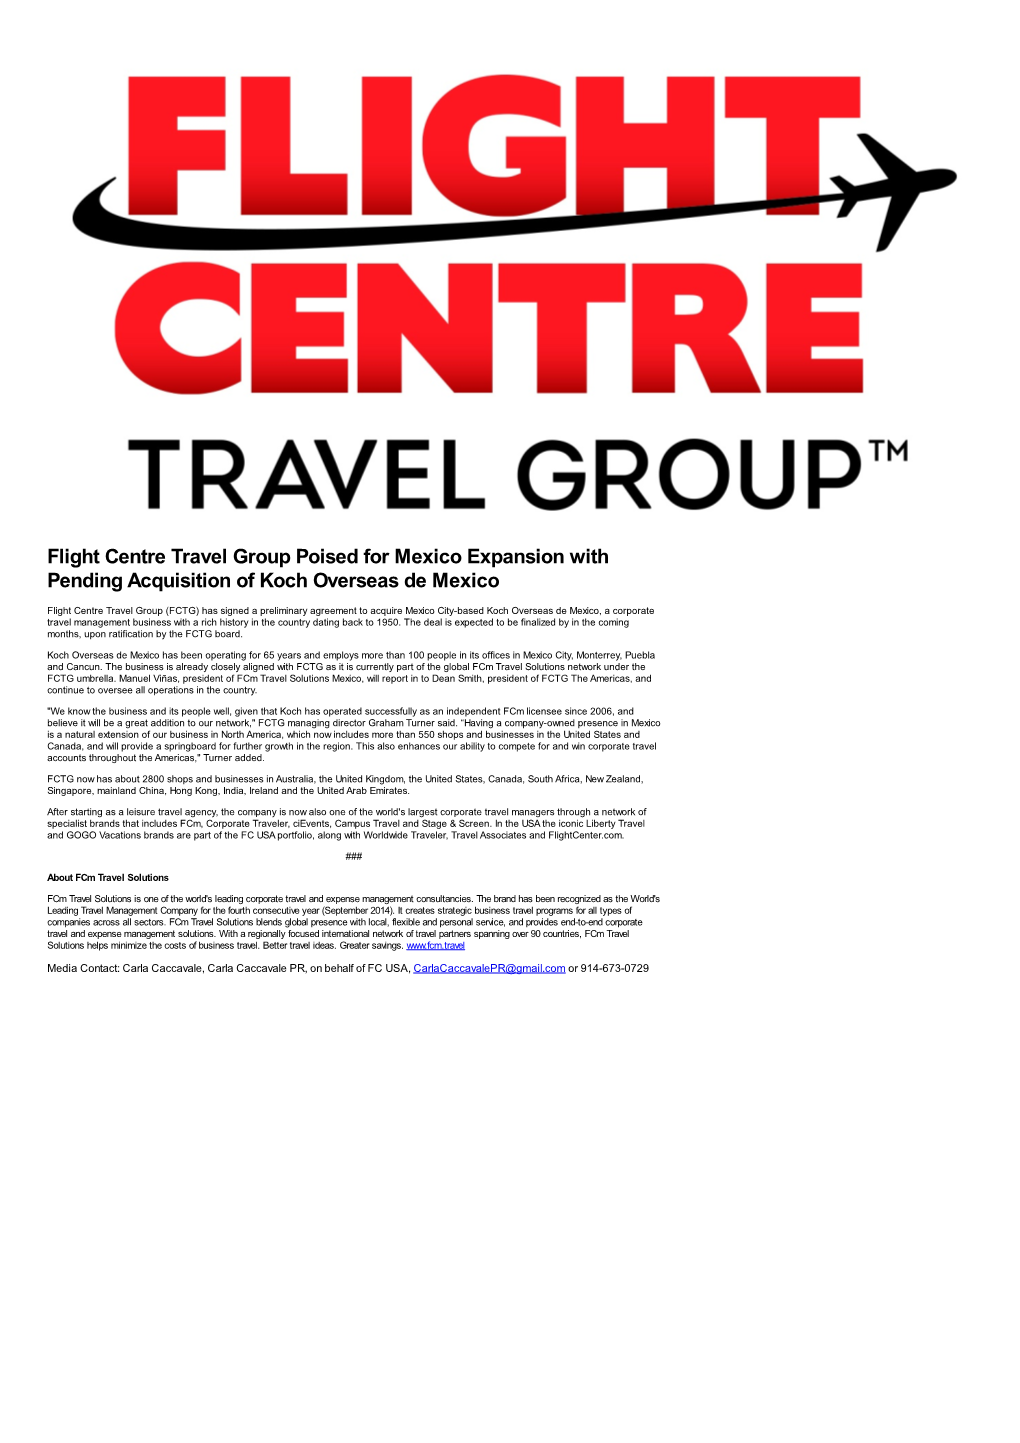 Flight Centre Travel Group Poised for Mexico Expansion with Pending Acquisition of Koch Overseas De Mexico